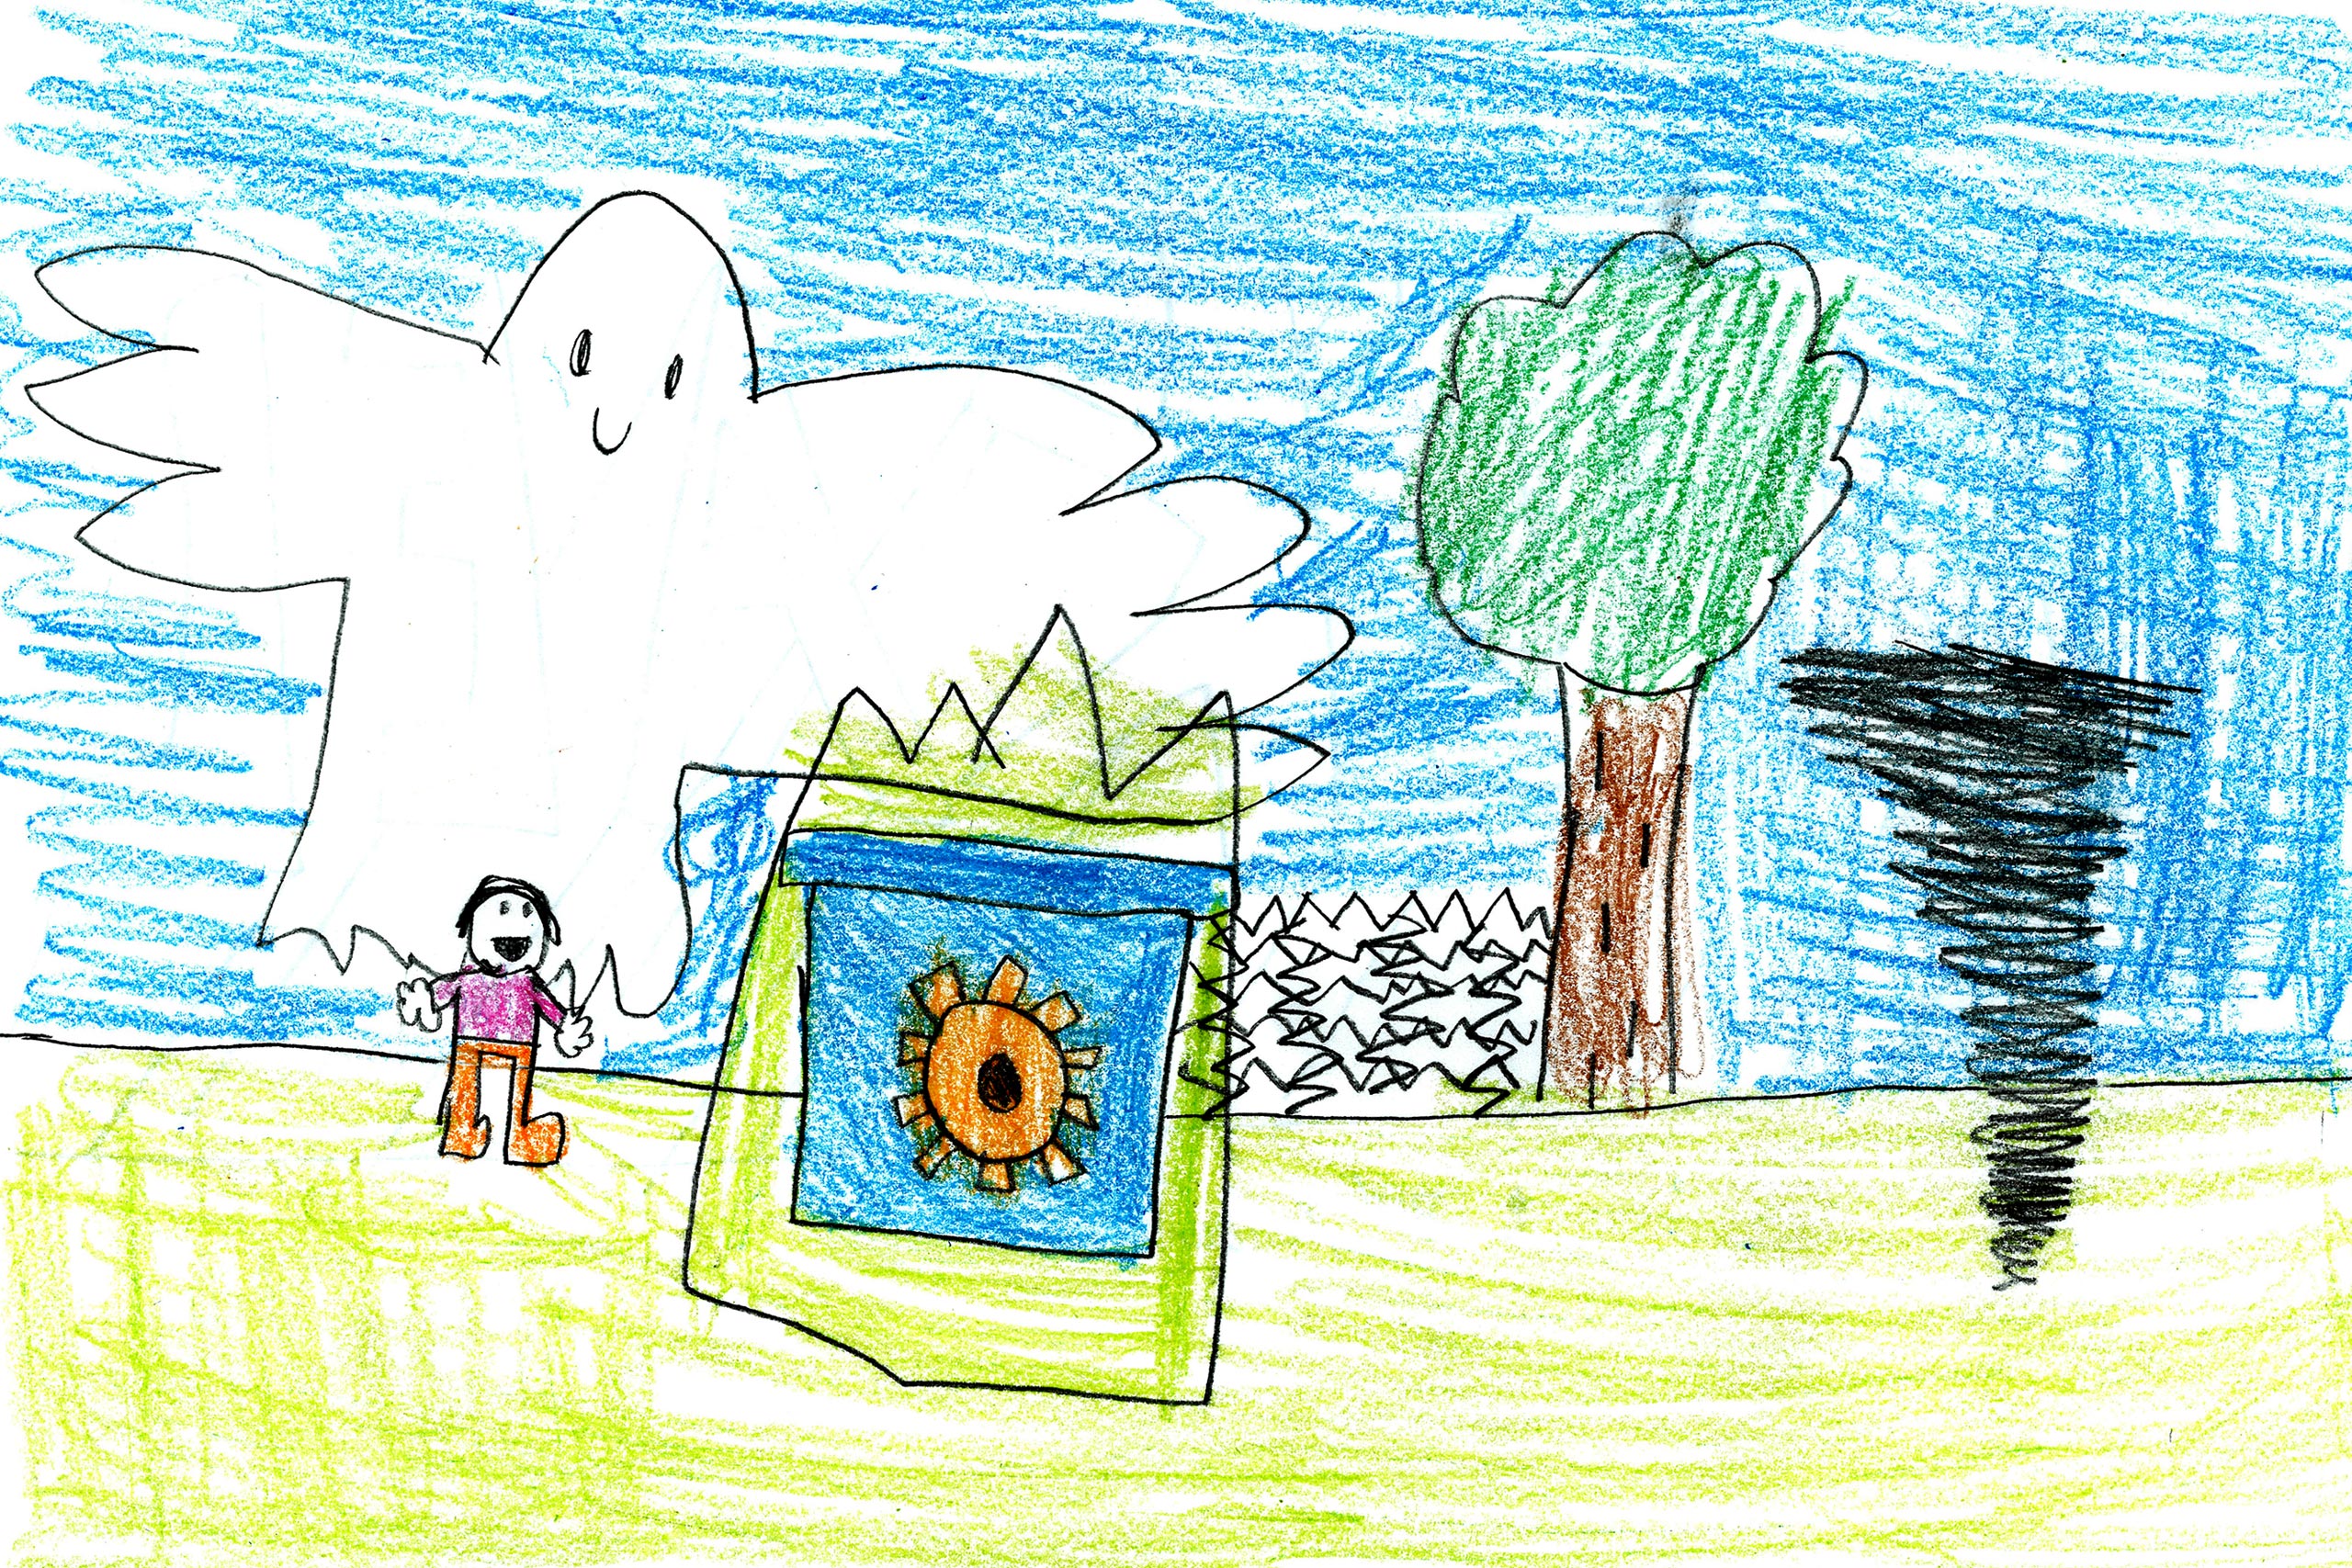 Child's drawing of ghost, wind, nature